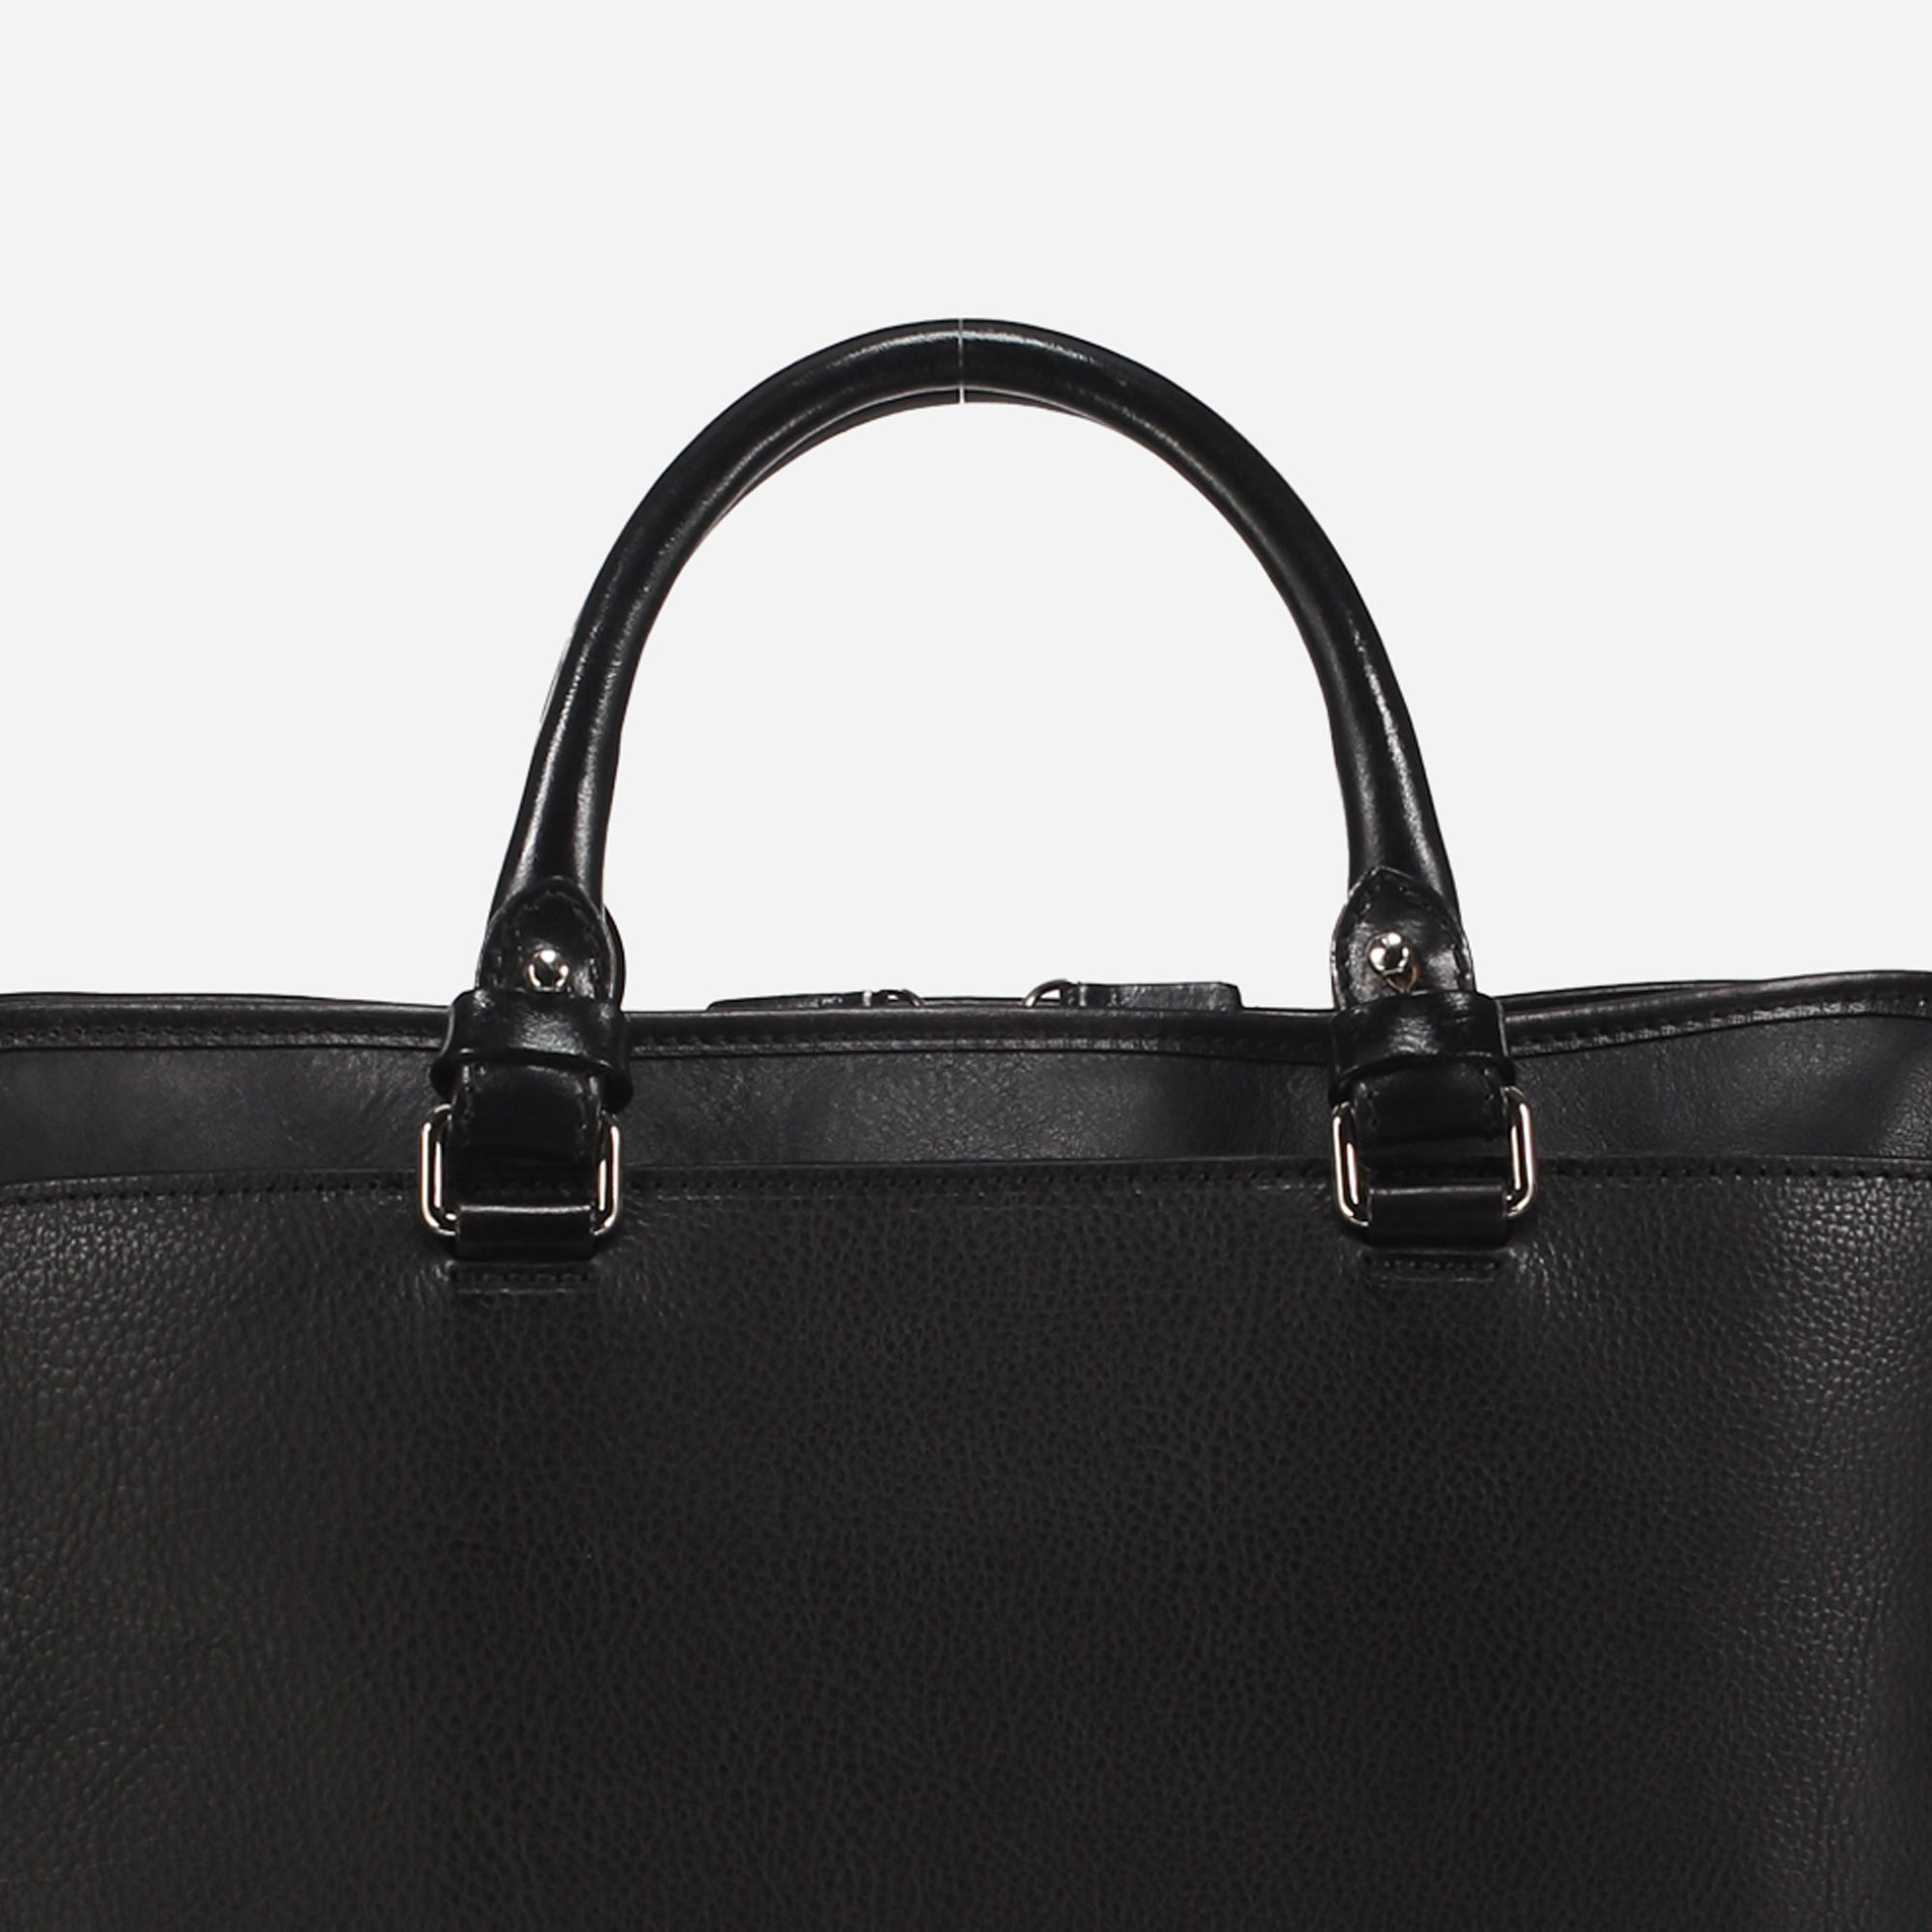 1848 Buttero - BUSINESS BAG <br> Briefcase